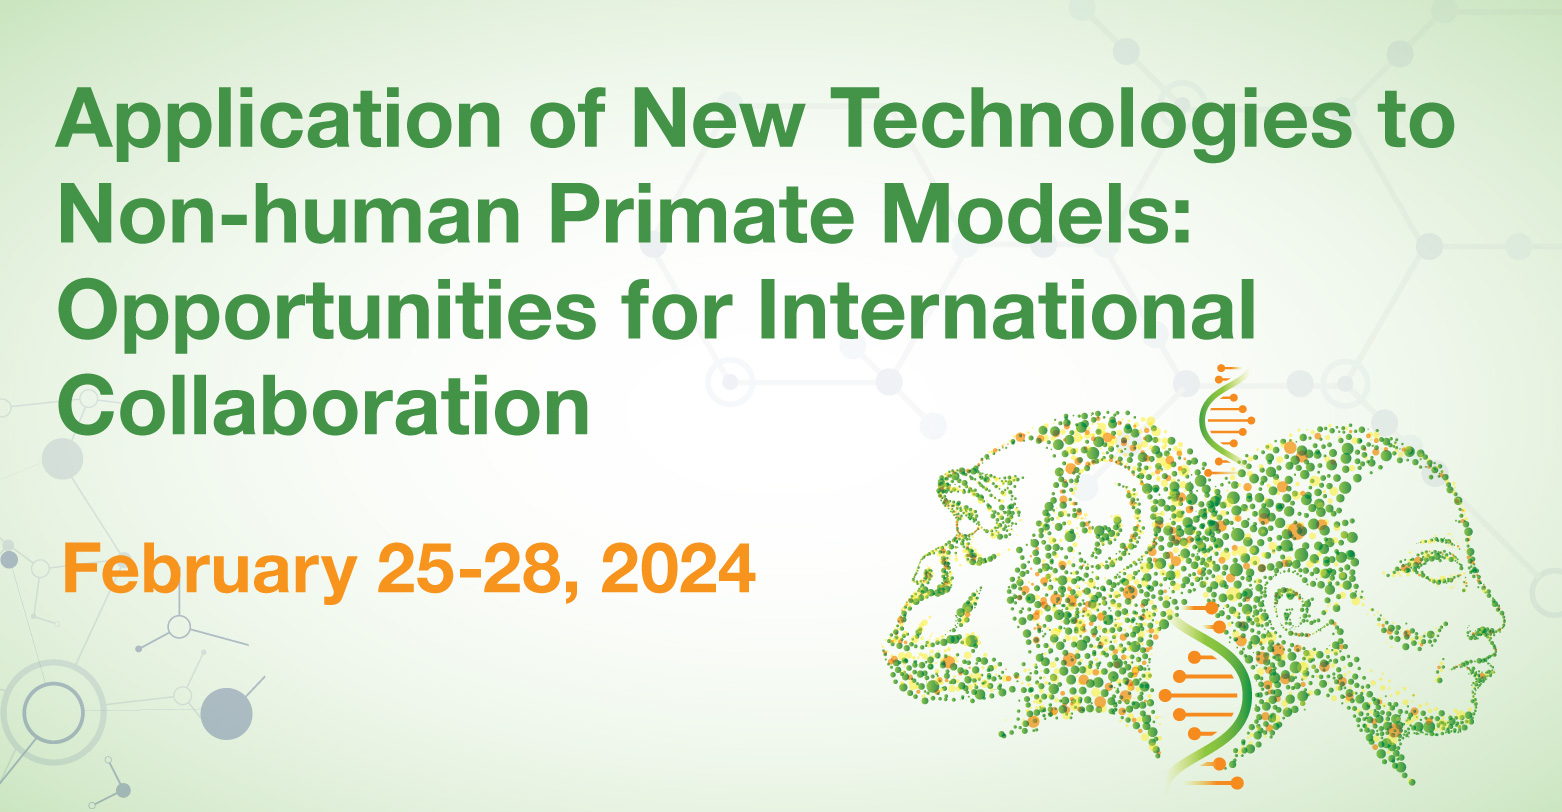 IAS Conference on Application of New Technologies to Nonhuman Primate Models (February 25-28, 2024)